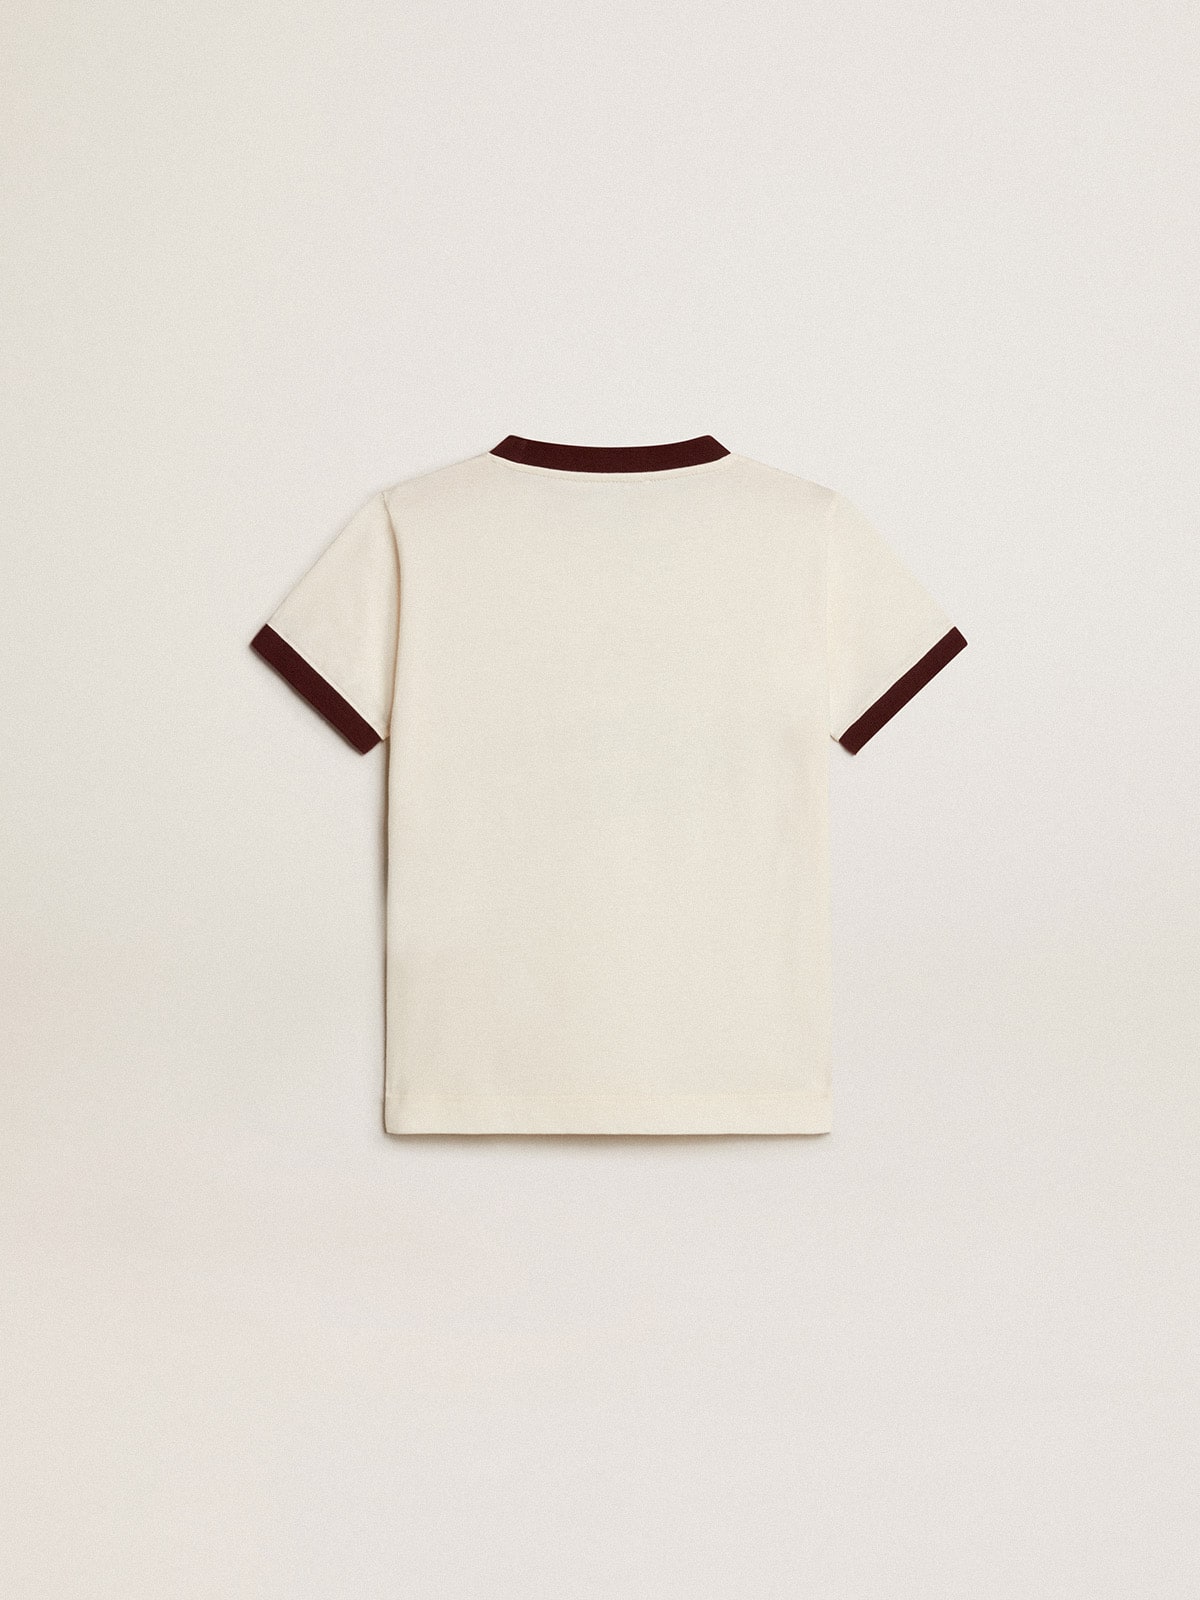 Golden Goose - Boys’ white cotton T-shirt with faded print at the center in 